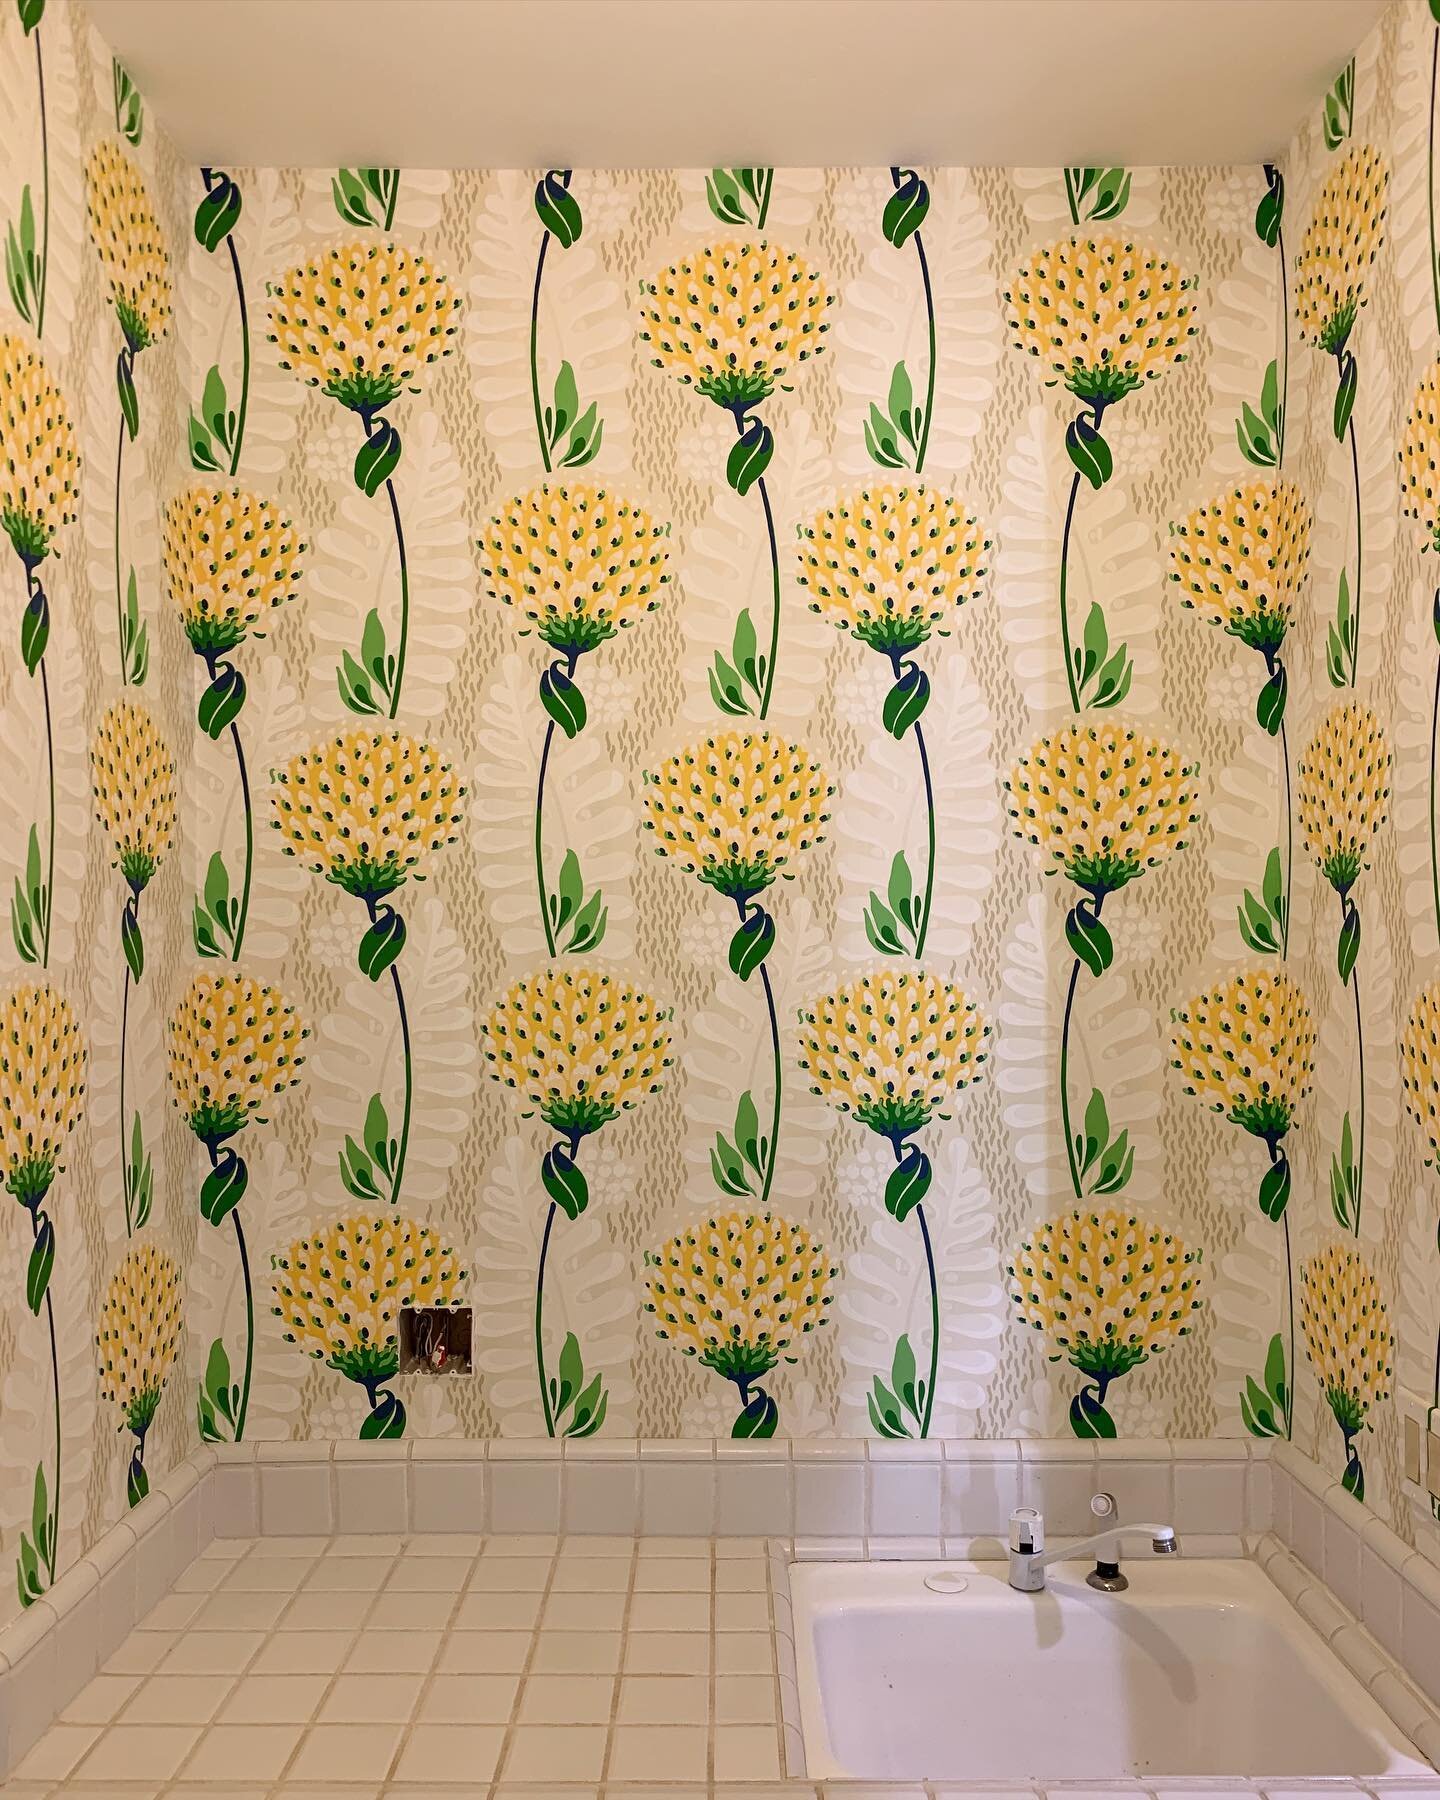 An adorable new print from @thibaut_1886 making this laundry room bright and cheery!